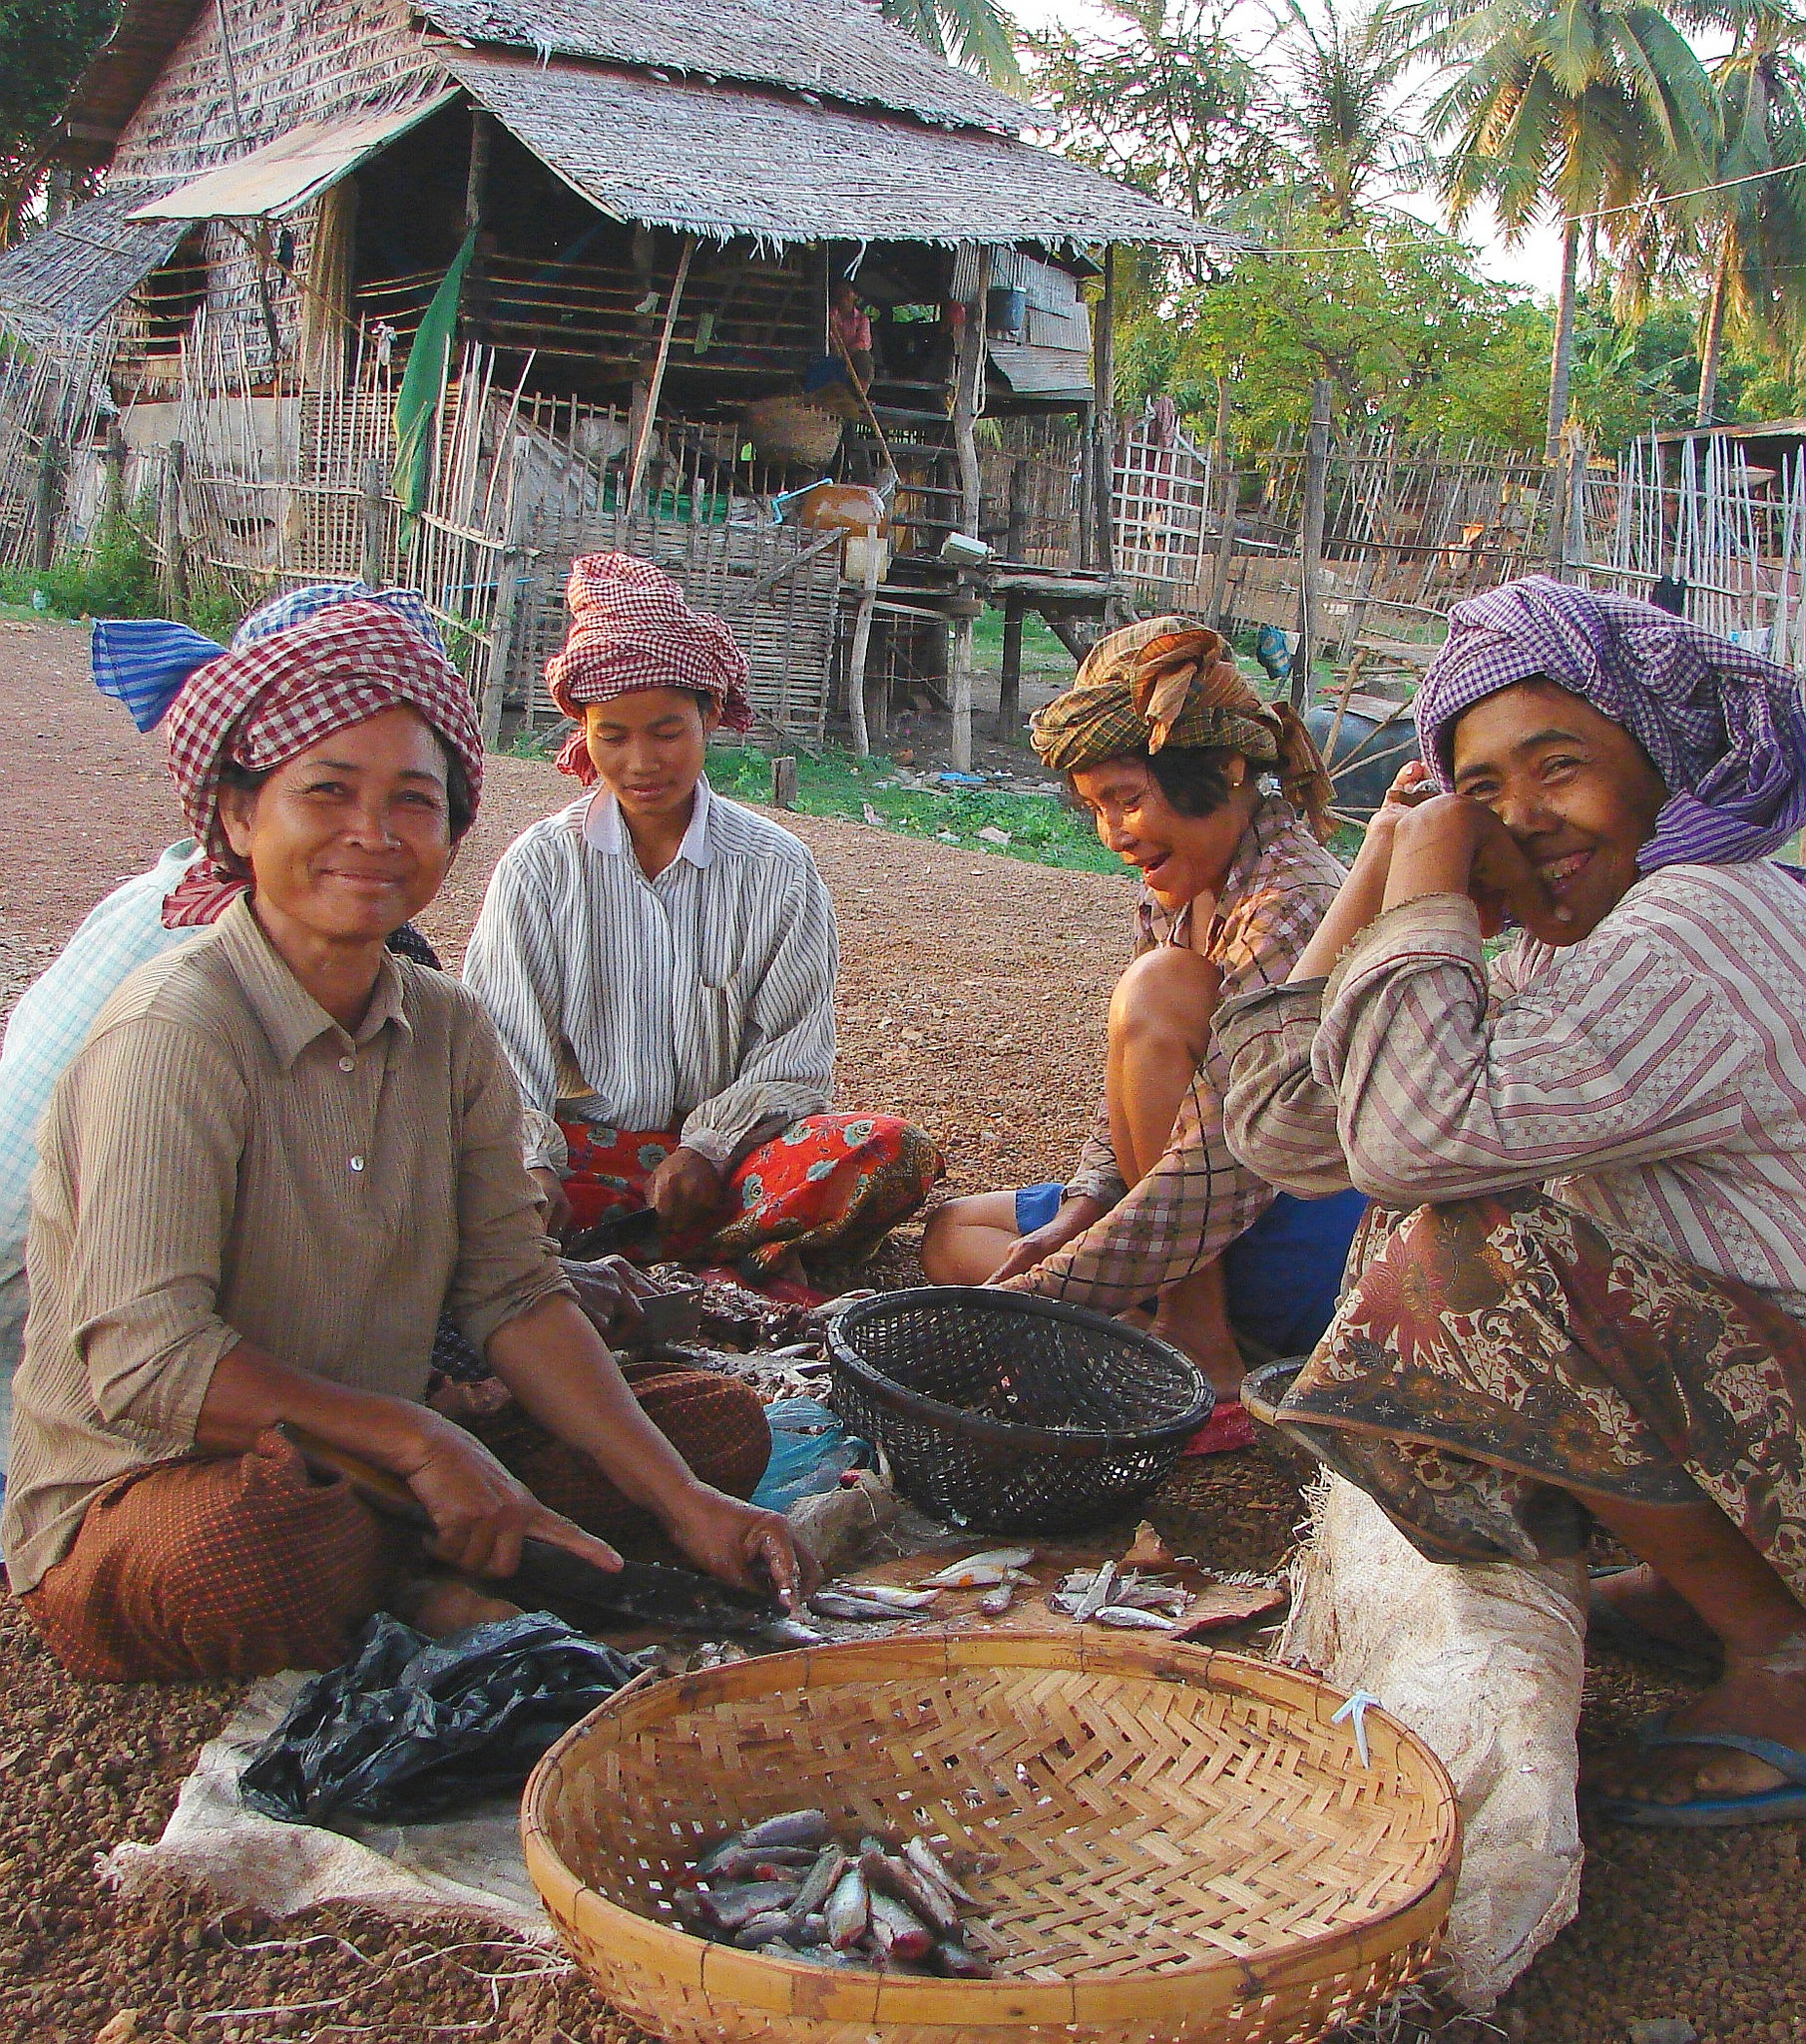 Women processing fish in Cambodia. Photo by Adelia Ribier, Flickr.